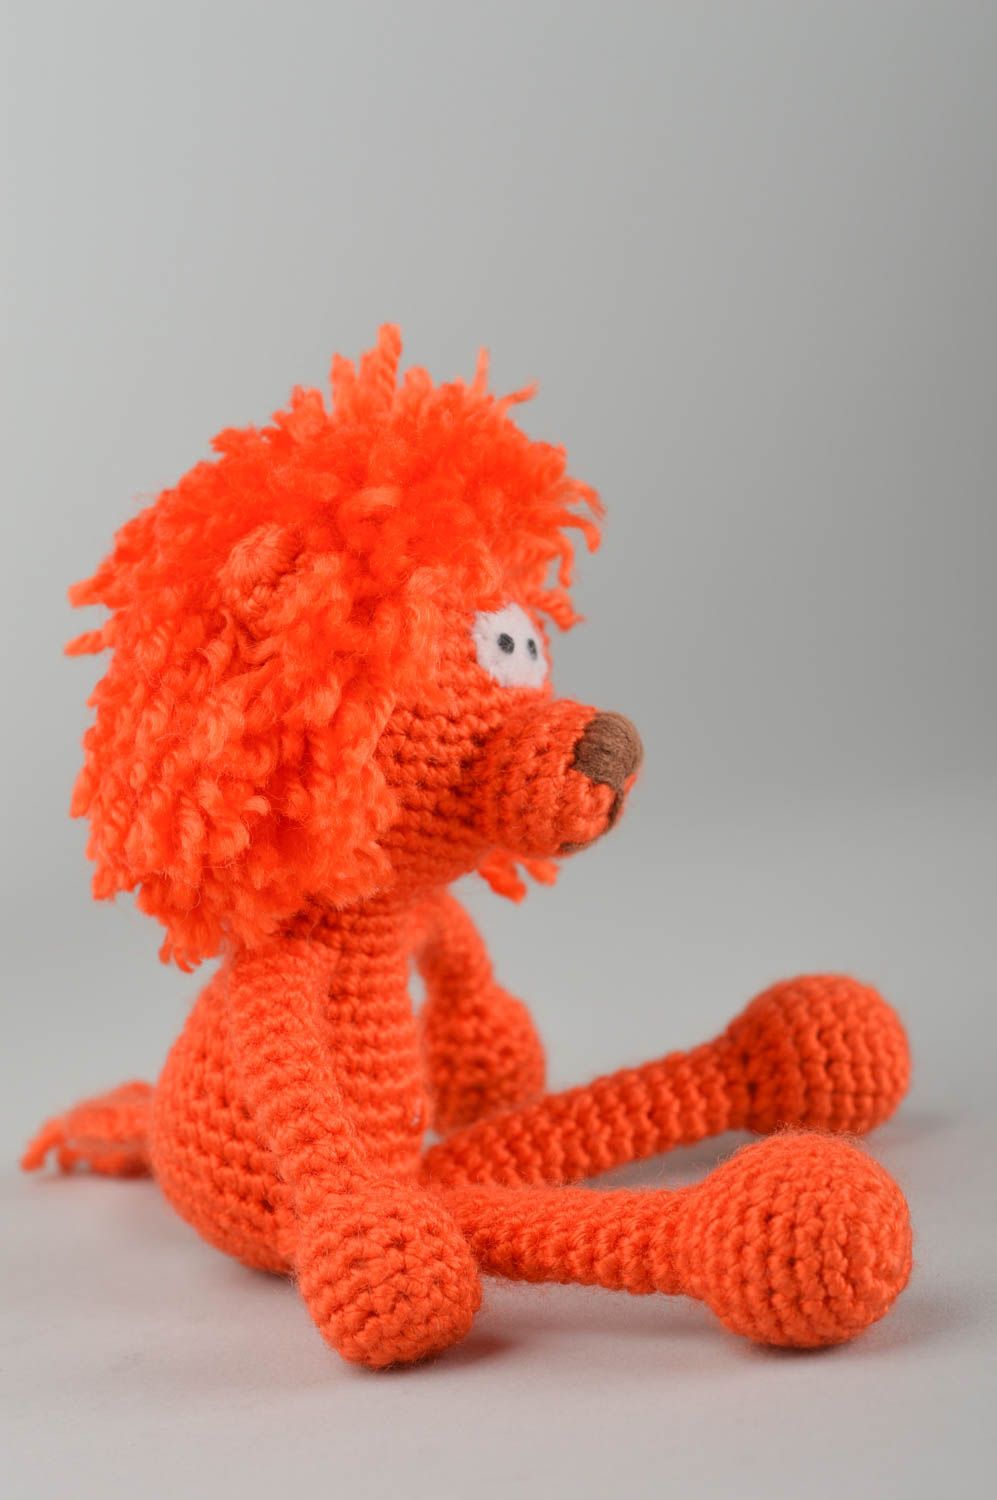 Handmade crocheted toy baby soft toy crocheted lion toy design crocheted toys   photo 2